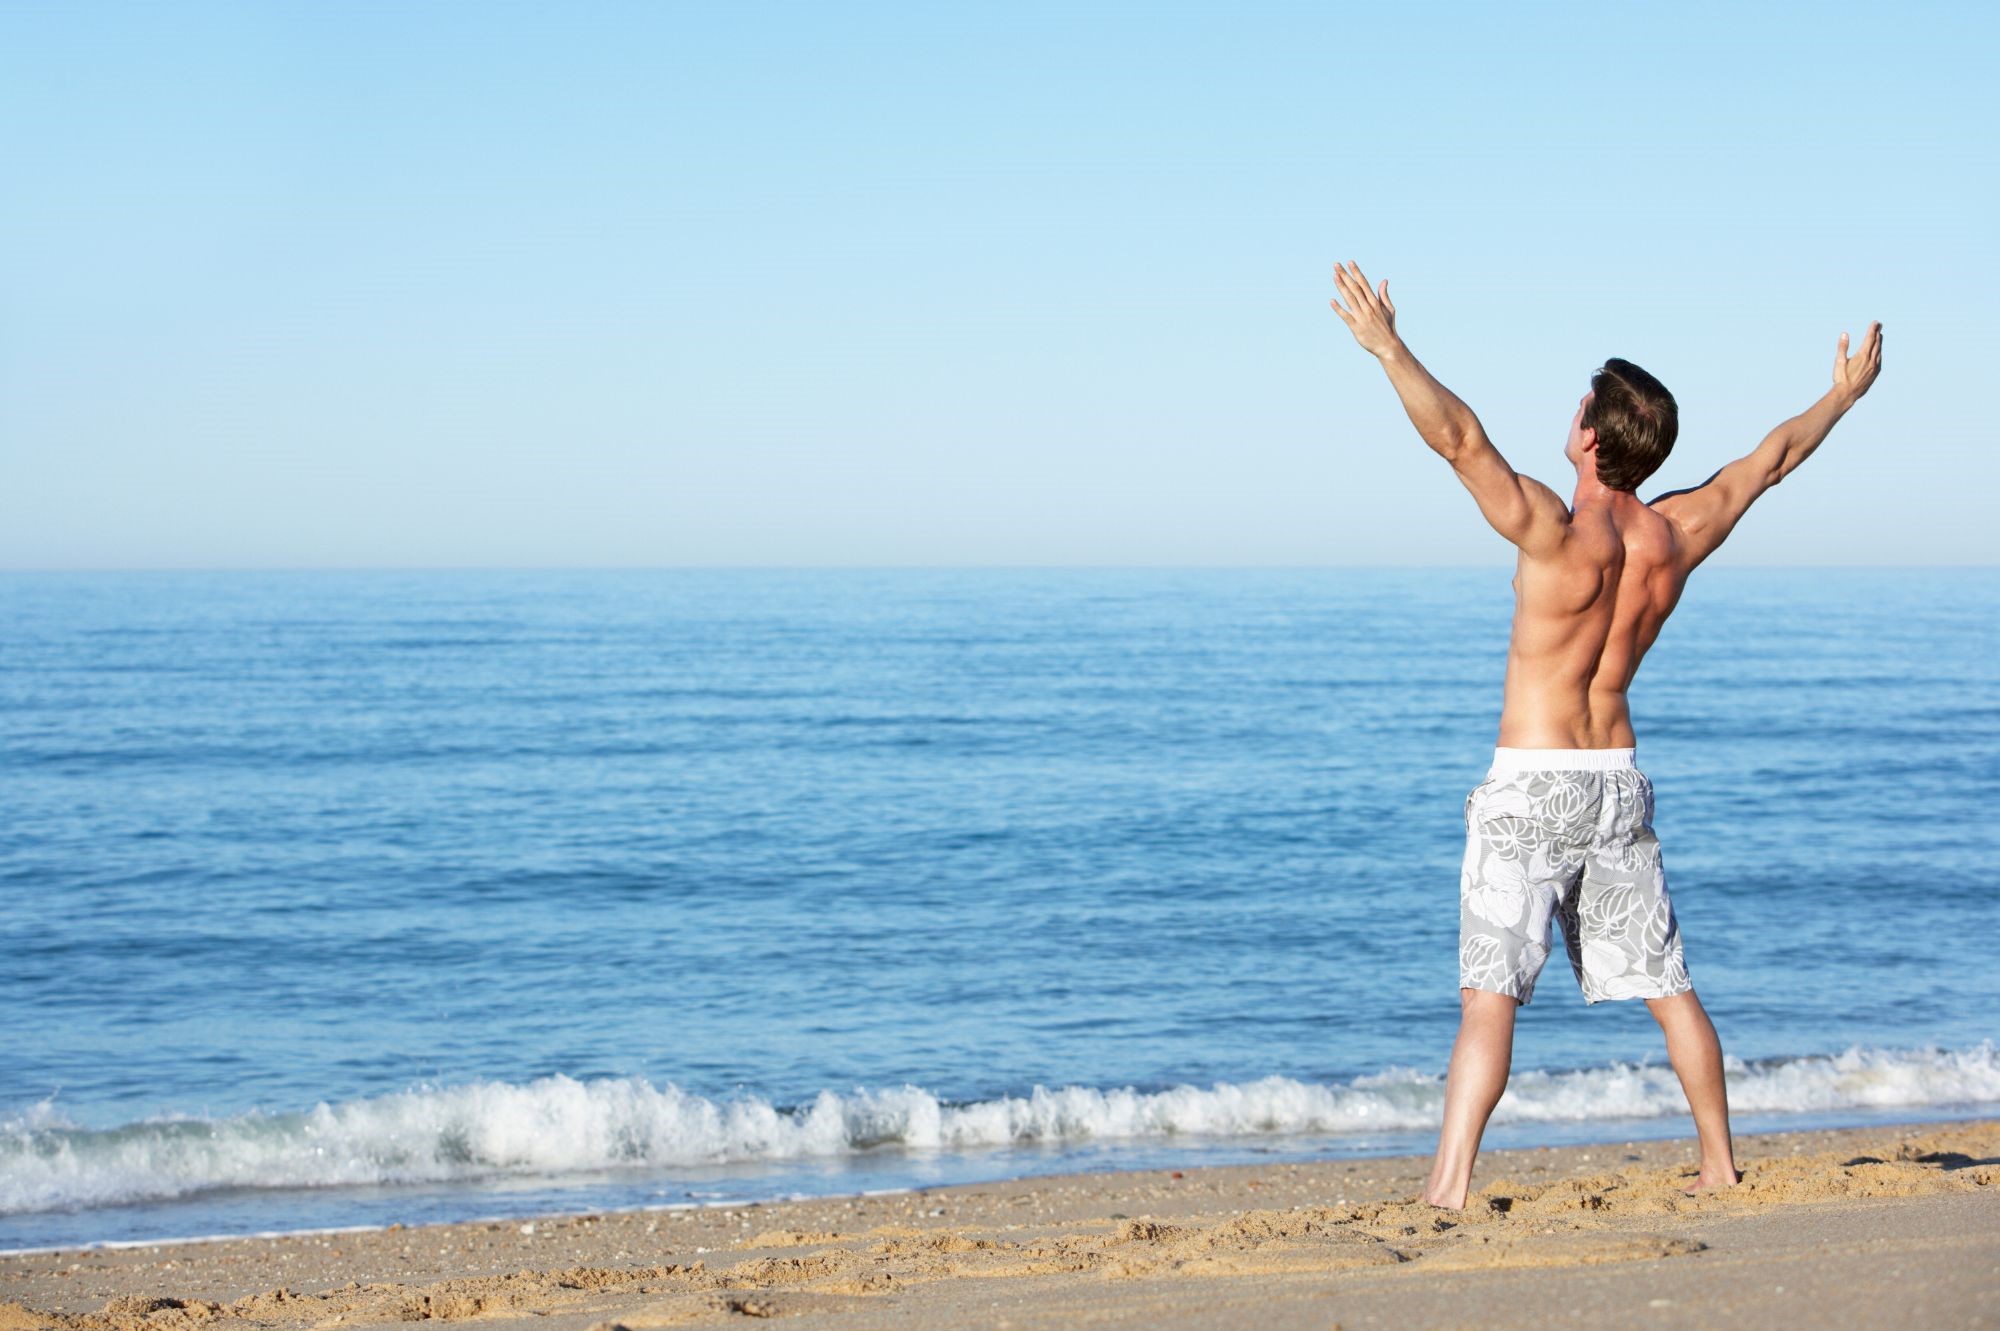 With laser hair removal for men, back hair at the beach will never be a worry again!